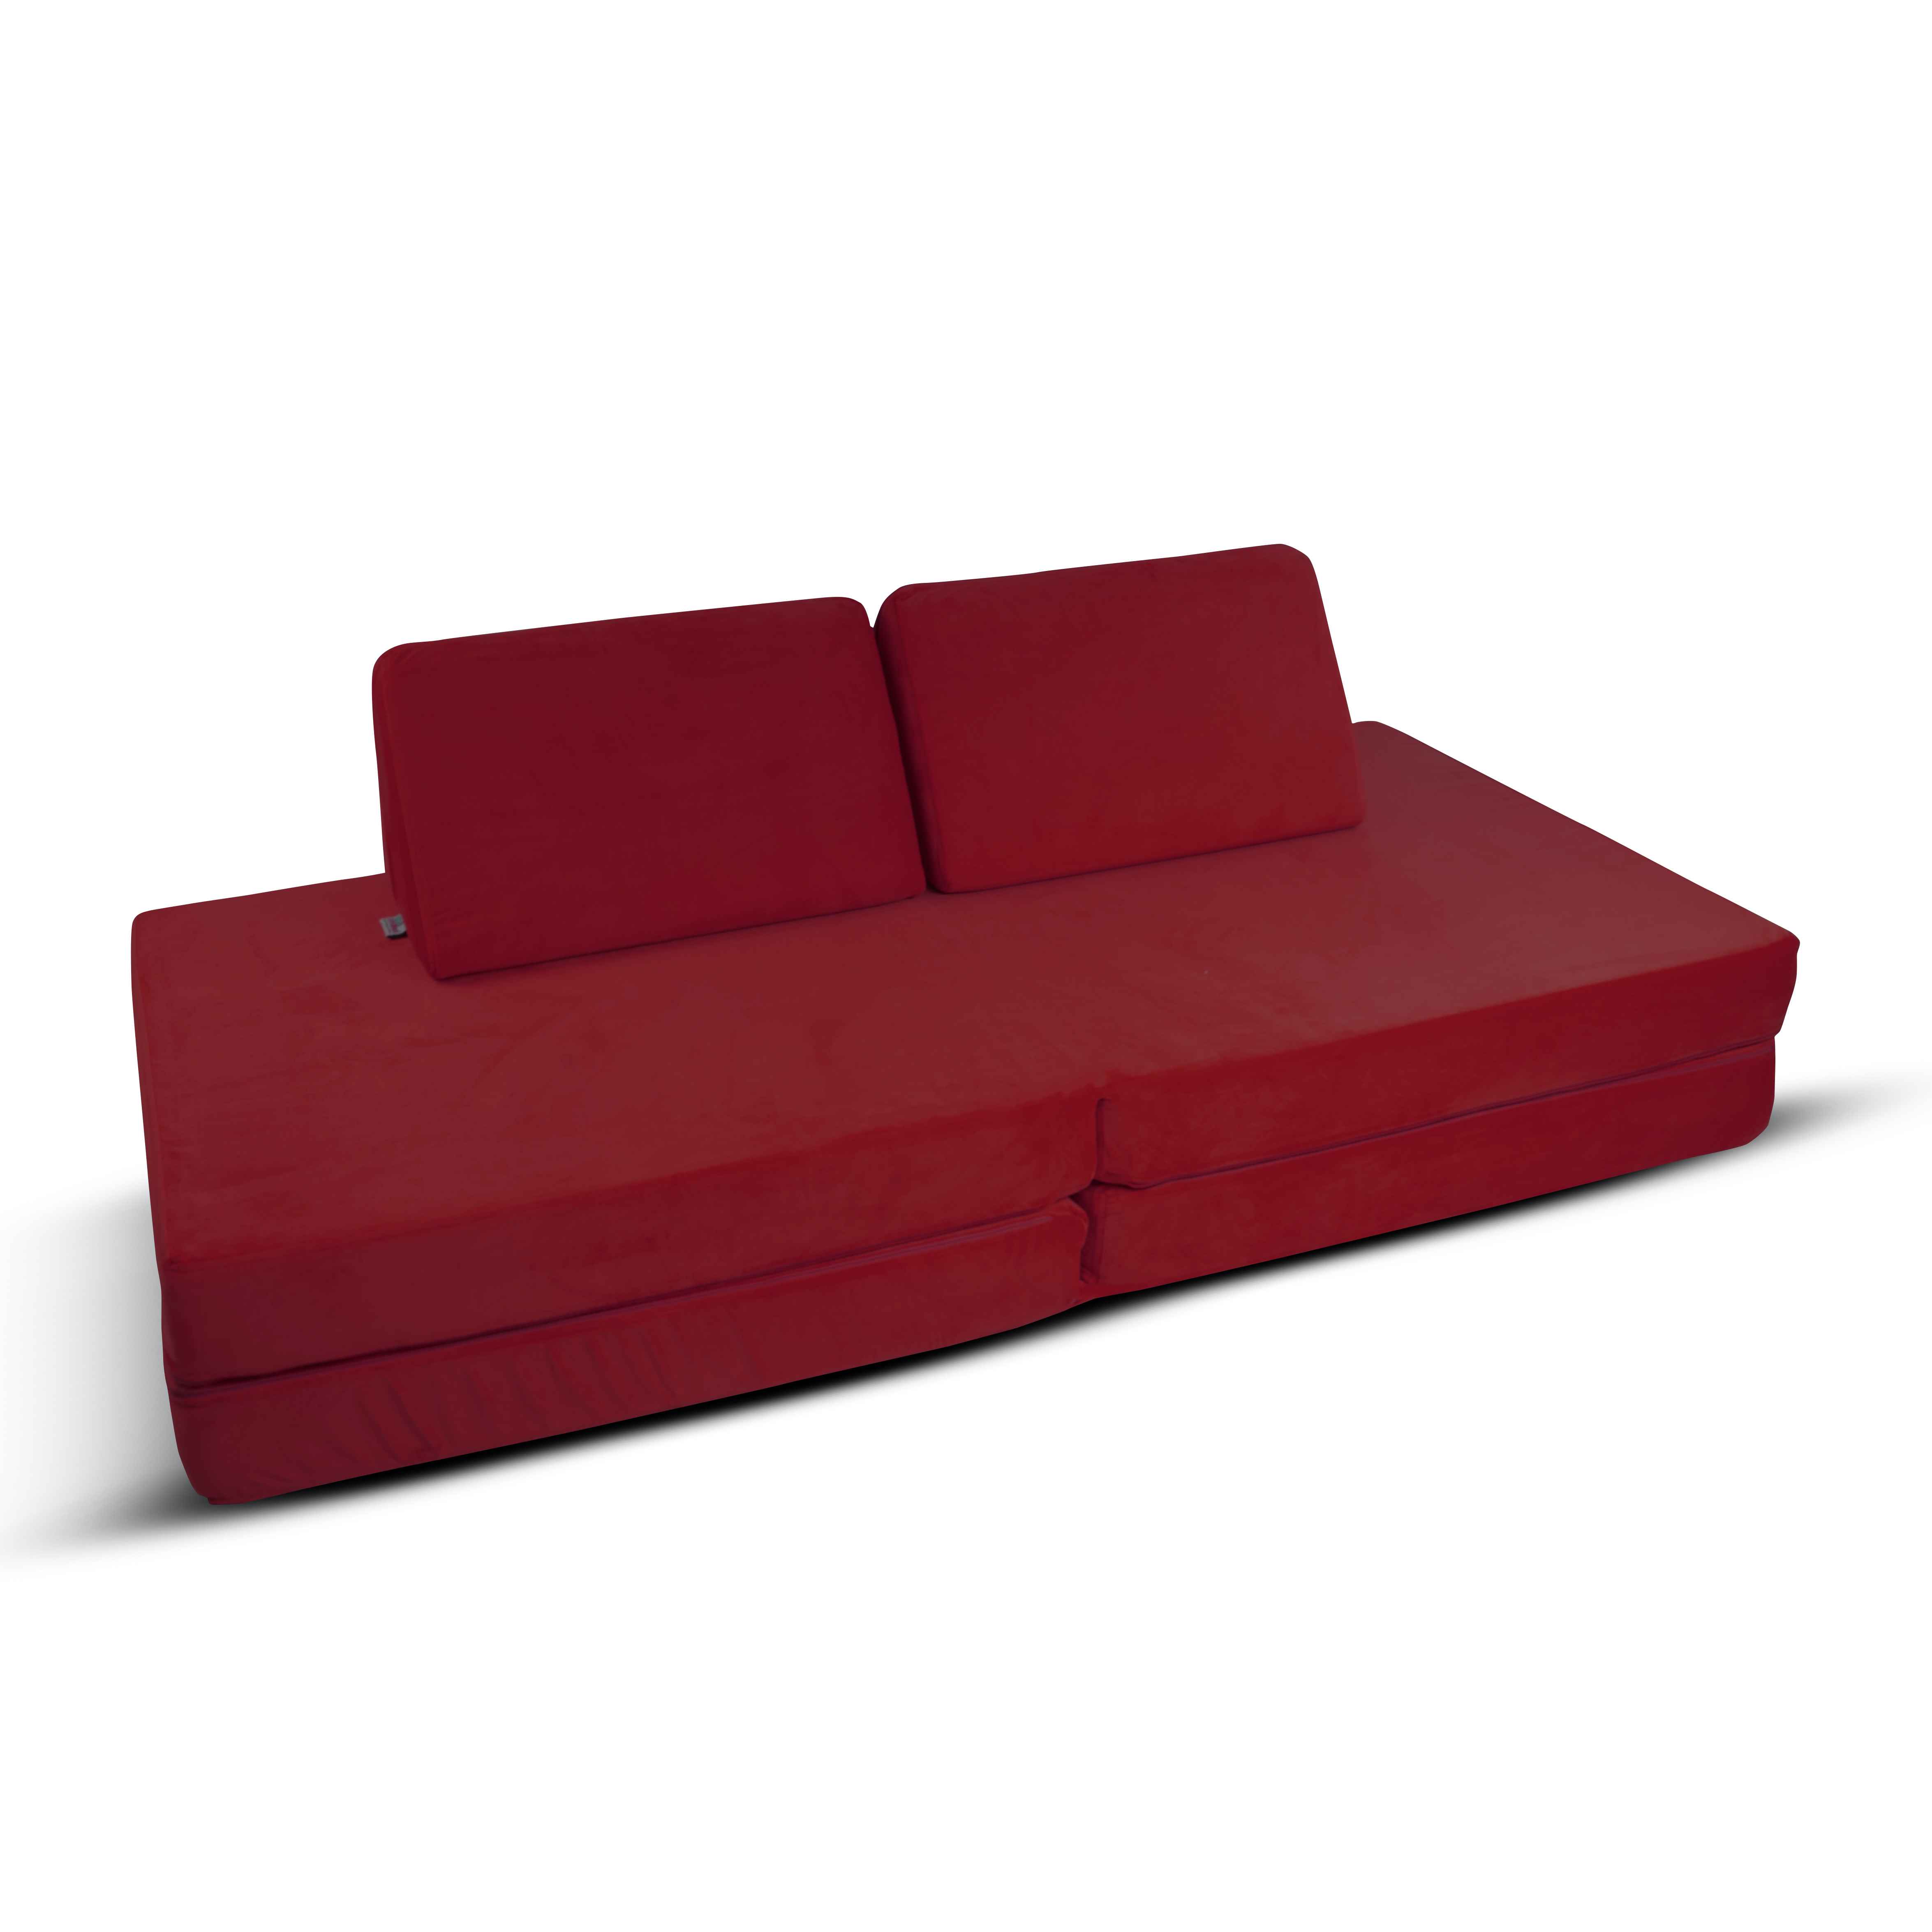 Cosmos Play Couch - Magical Maroon